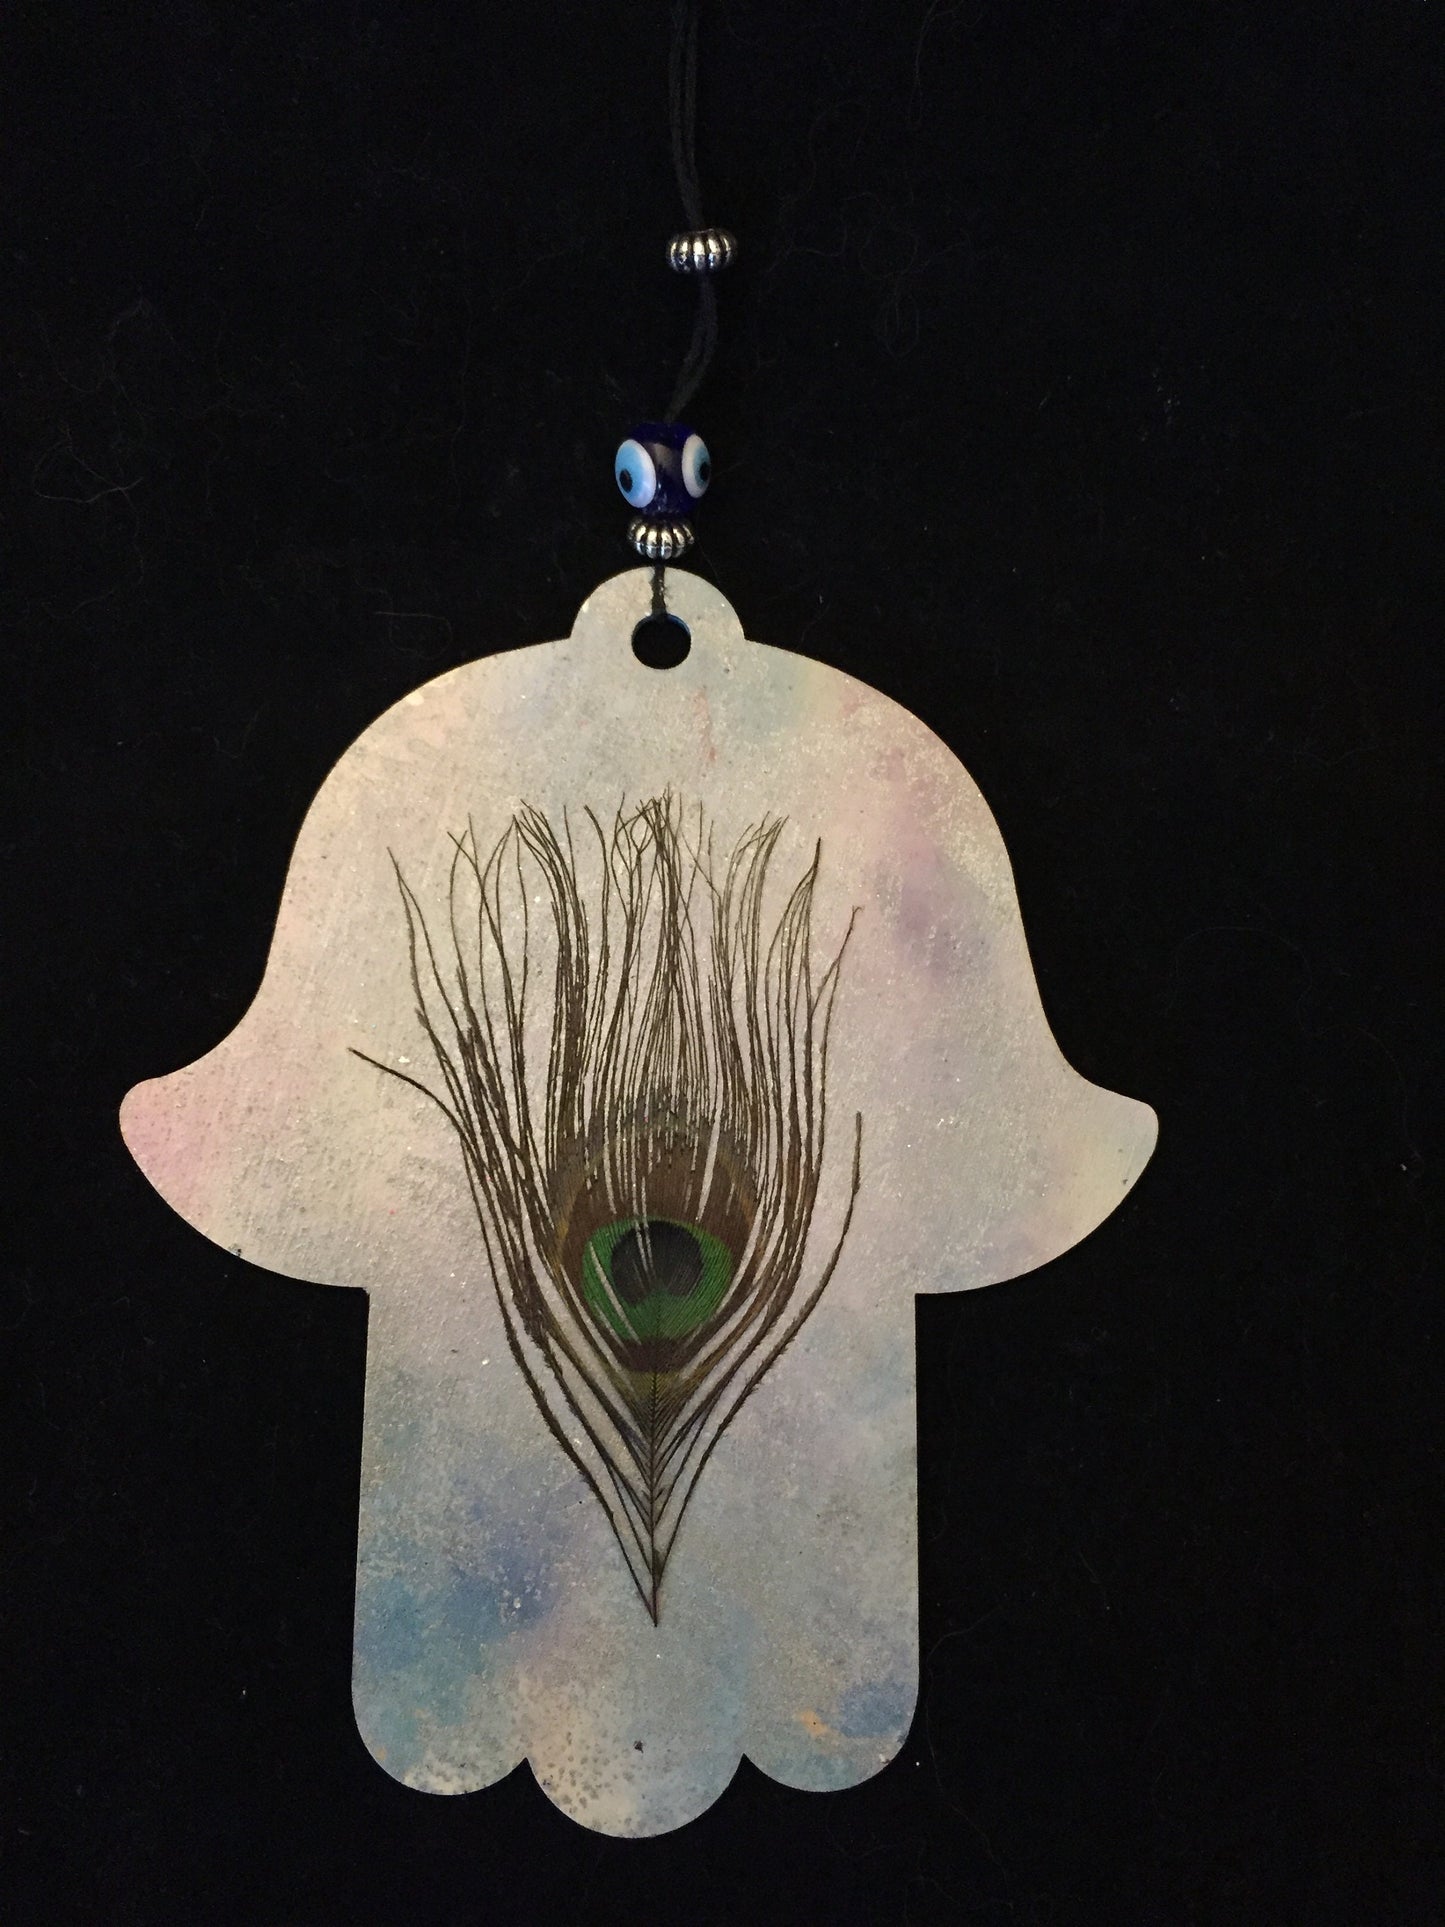 Handpainted Hamsa- Face with Peacock Feather